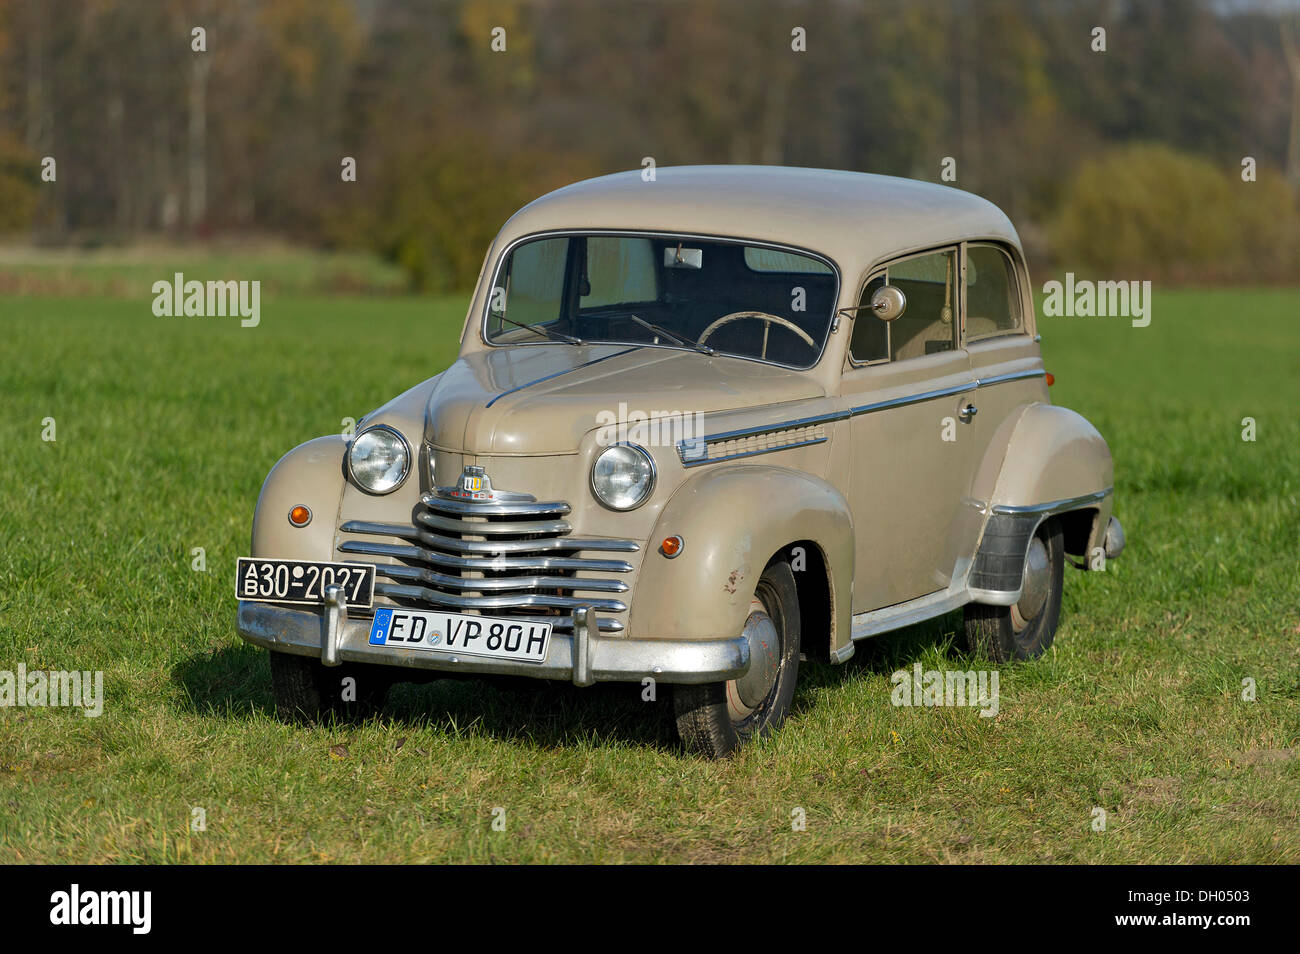 Vintage Opel Olympia, built in c. 1950, PublicGround Stock Photo